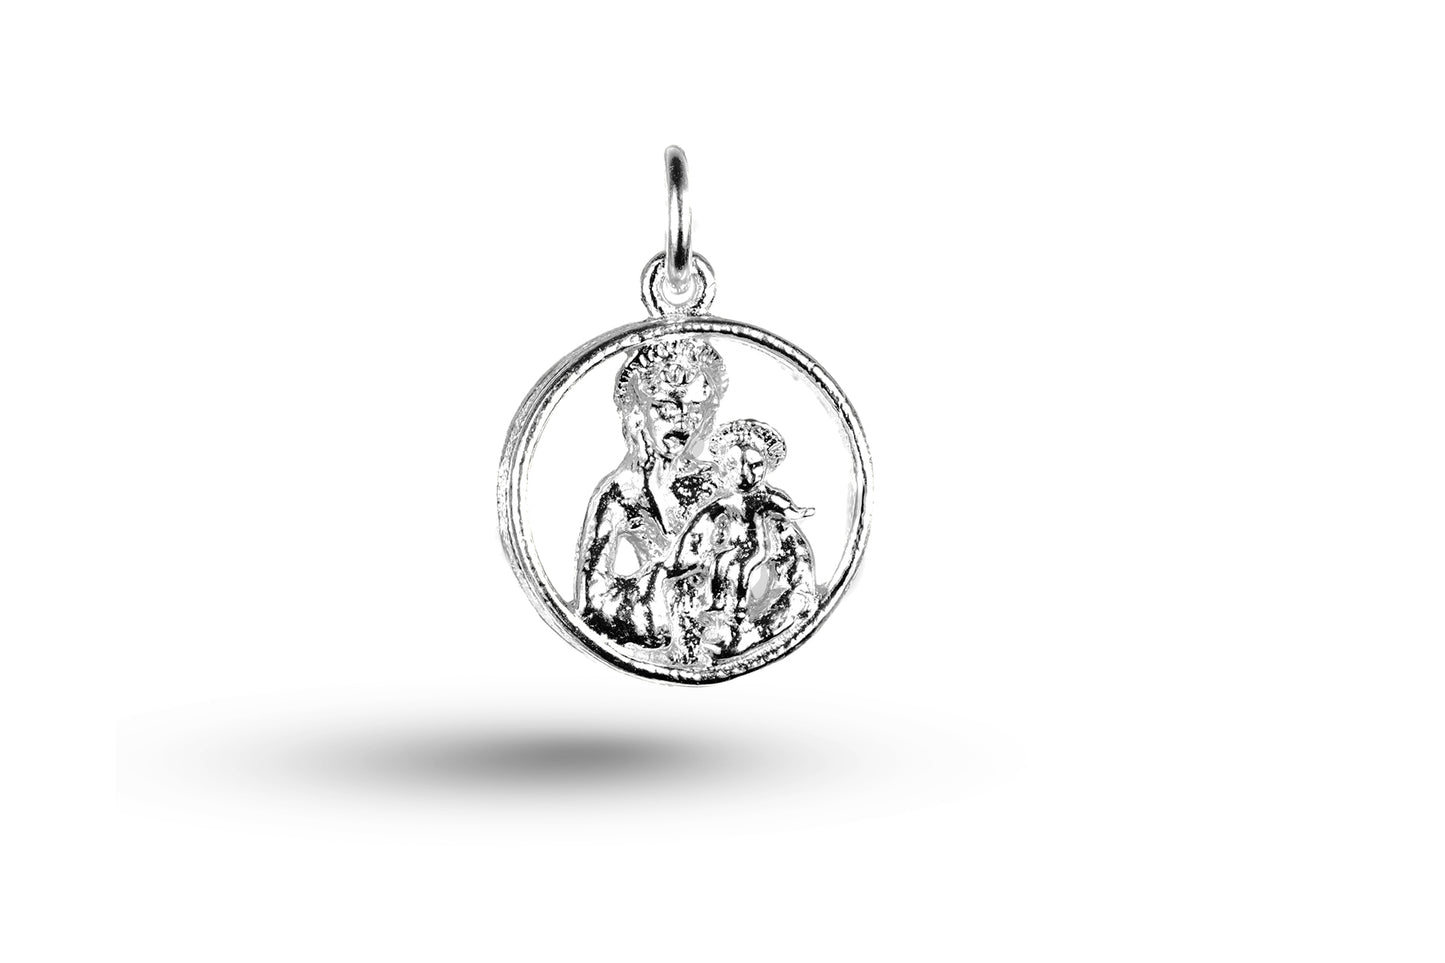 White gold Madonna and Child in Surround charm.